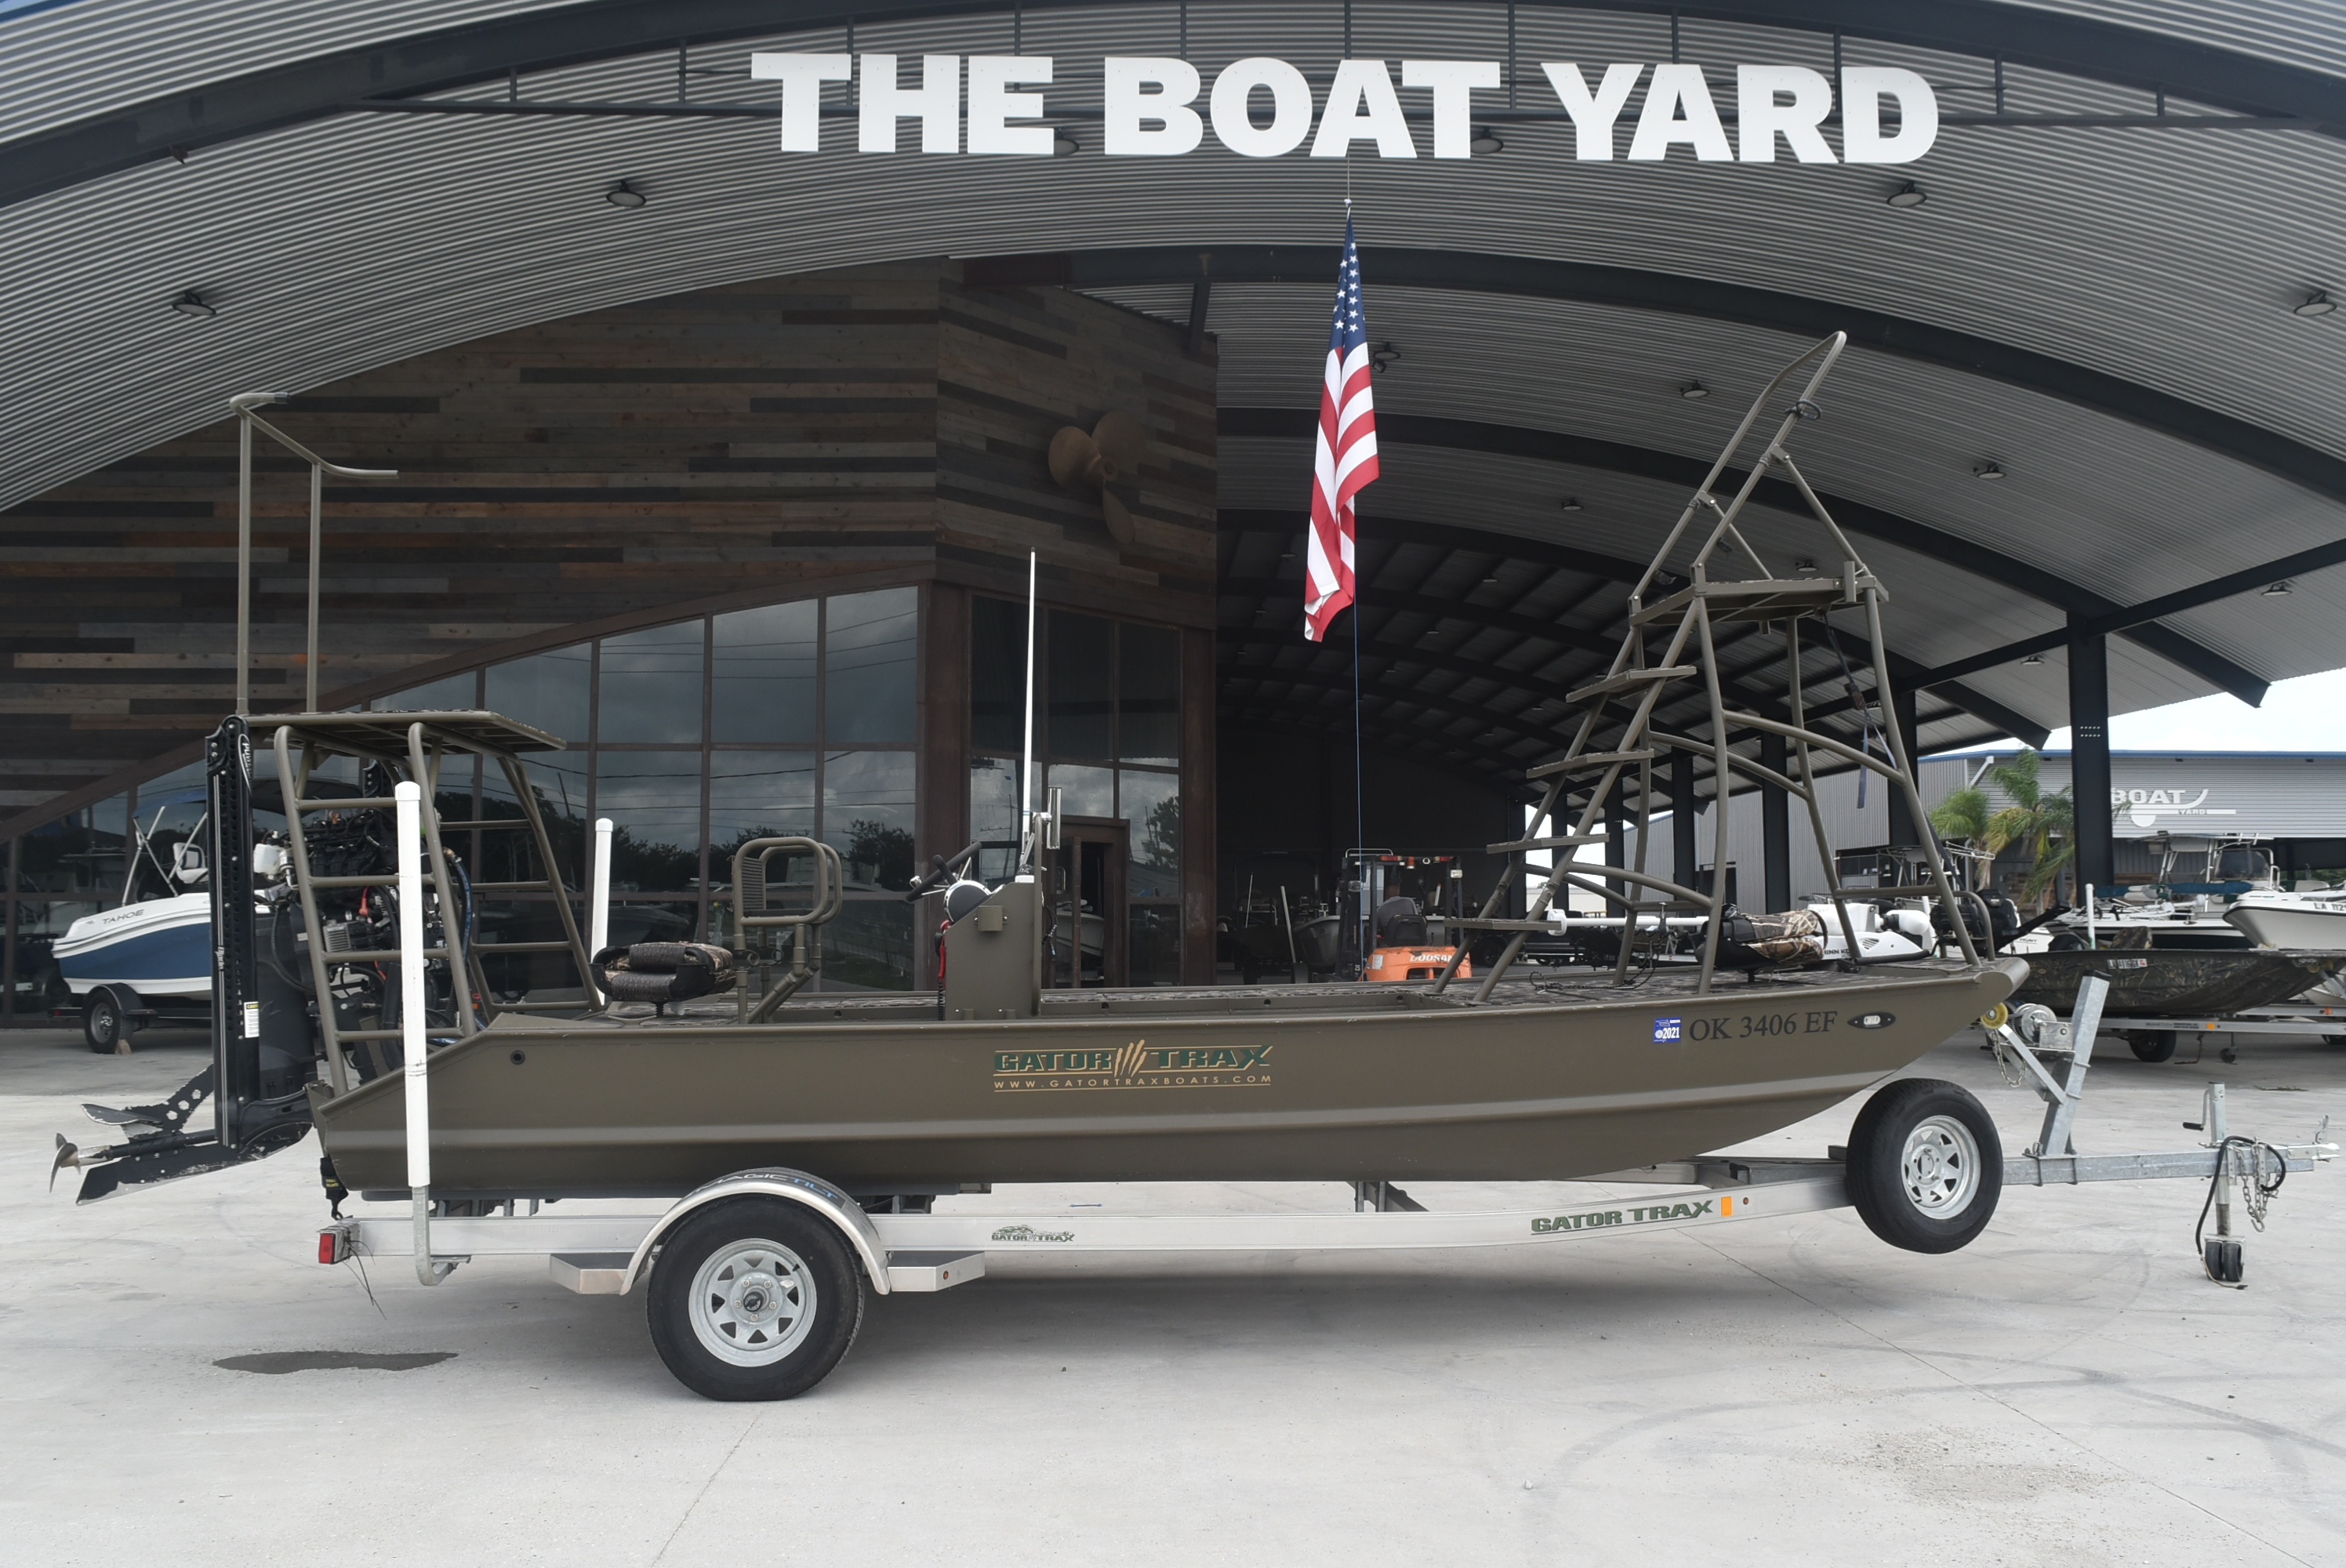 2019 GATORTRAX boat for sale, model of the boat is 1962 & Image # 1 of 9